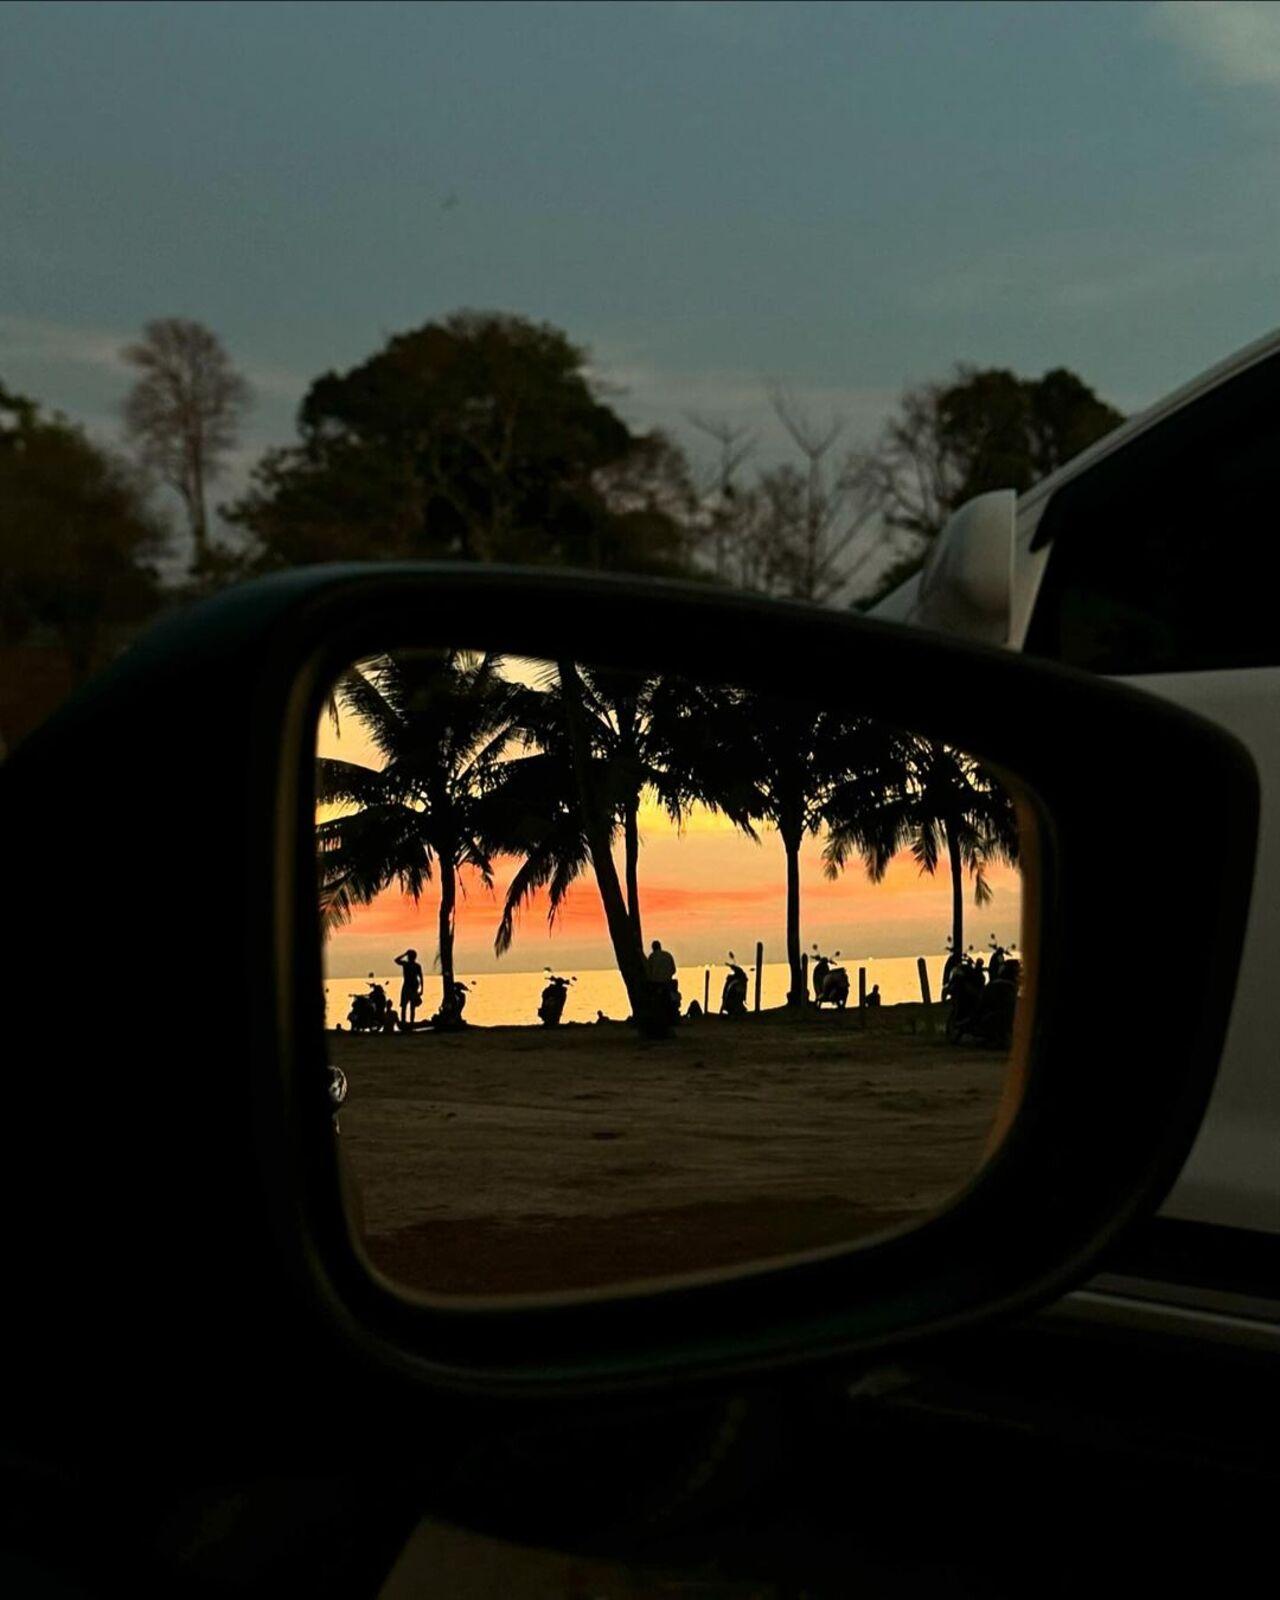 She even captured it in her car mirror and shared the stunning view with fans and followers. 